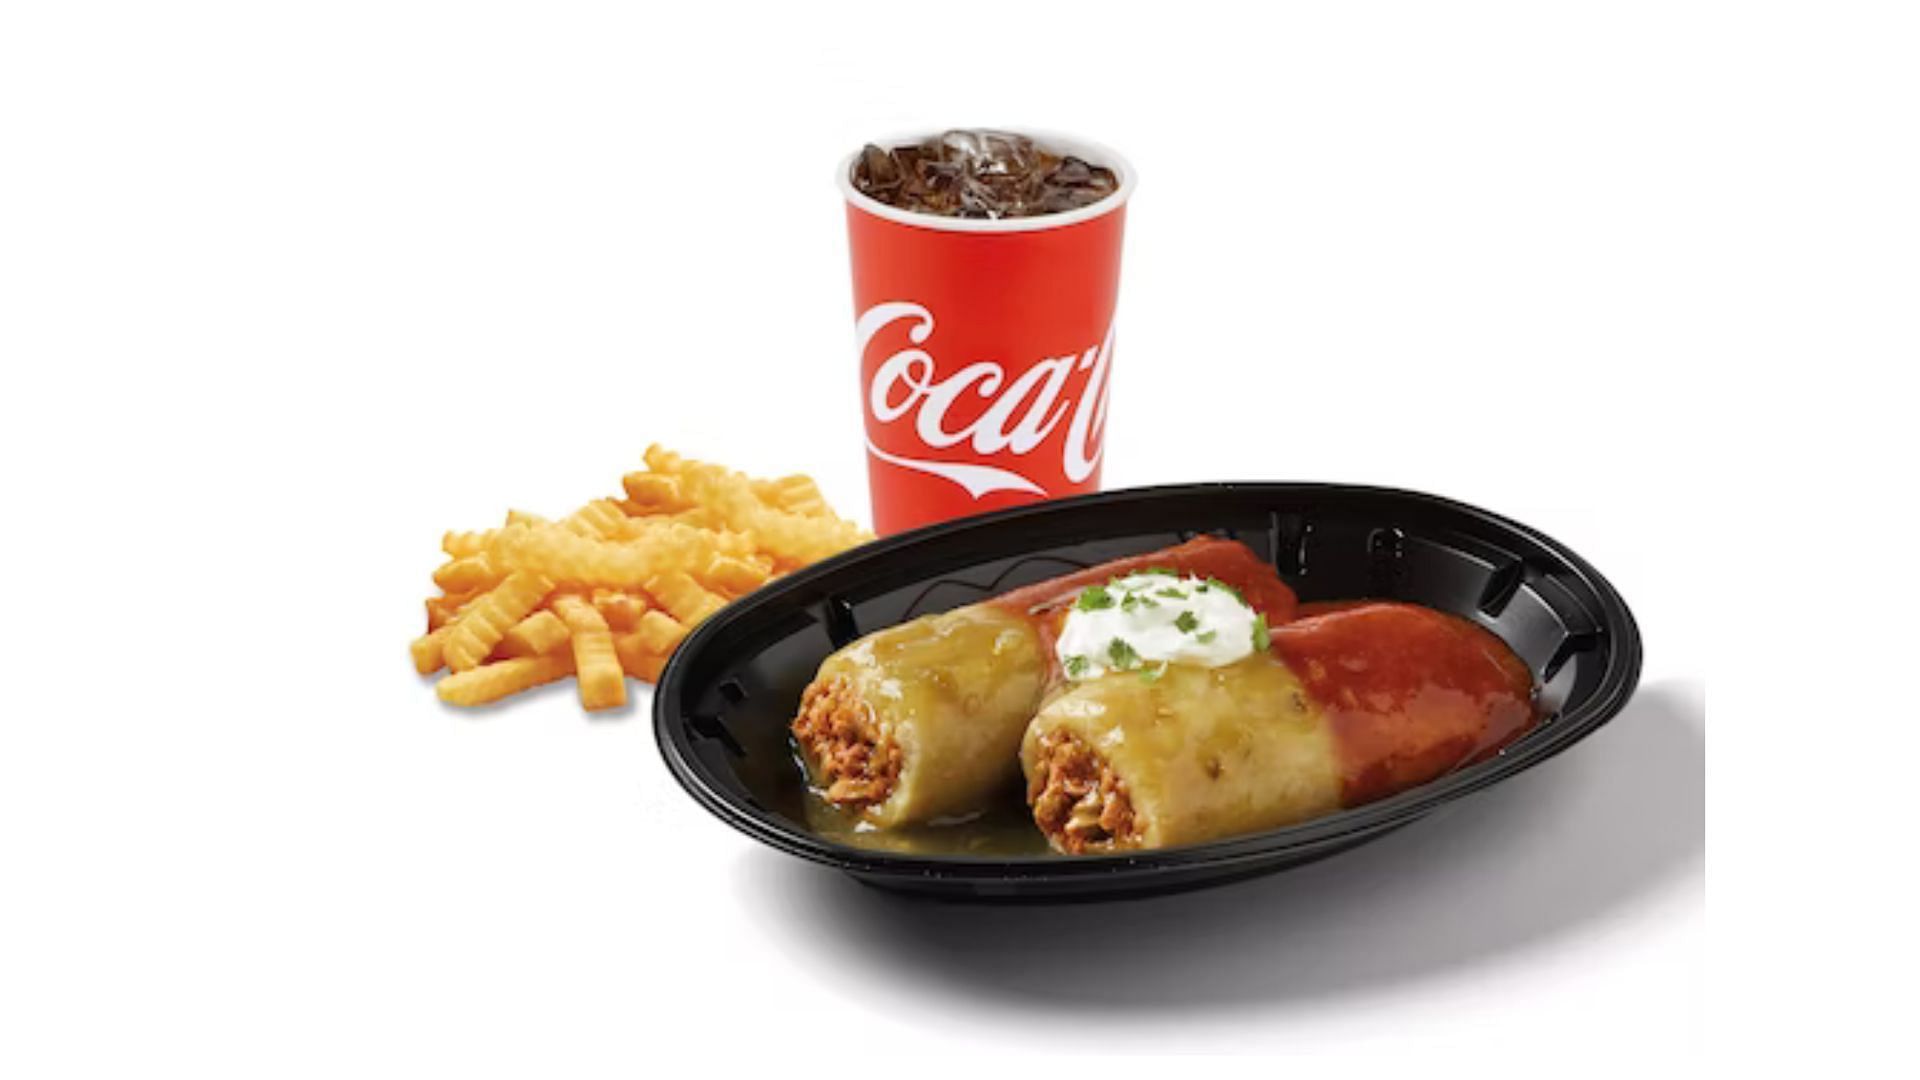 Smothered Tamale Meal with Crinkle-cut fries and Coca Cola (Image via Del Taco)